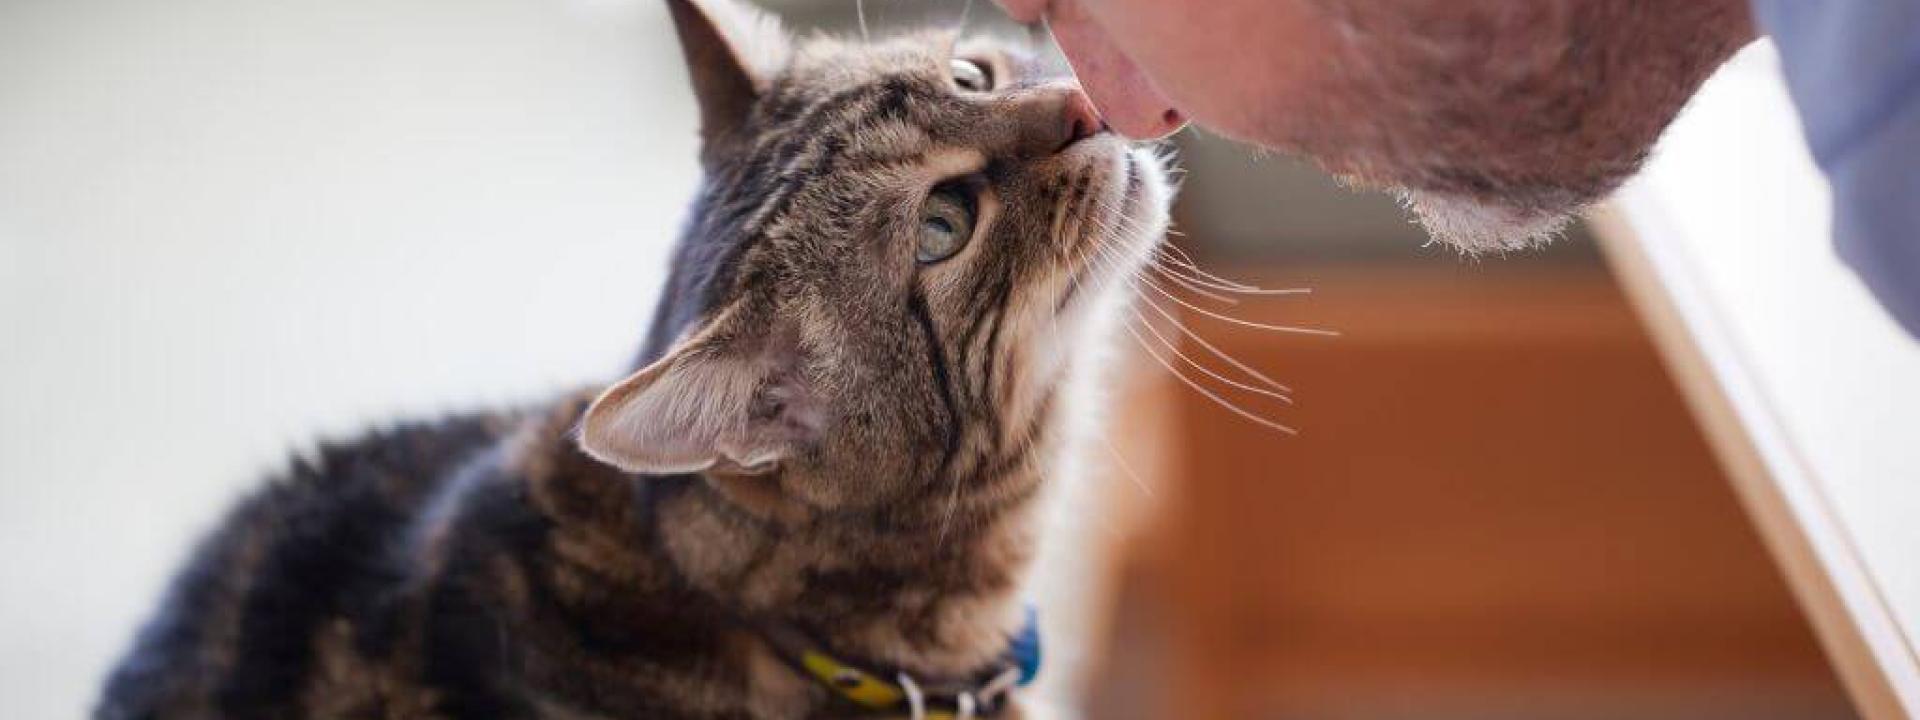 Cat giving an owner a kiss on the nose.